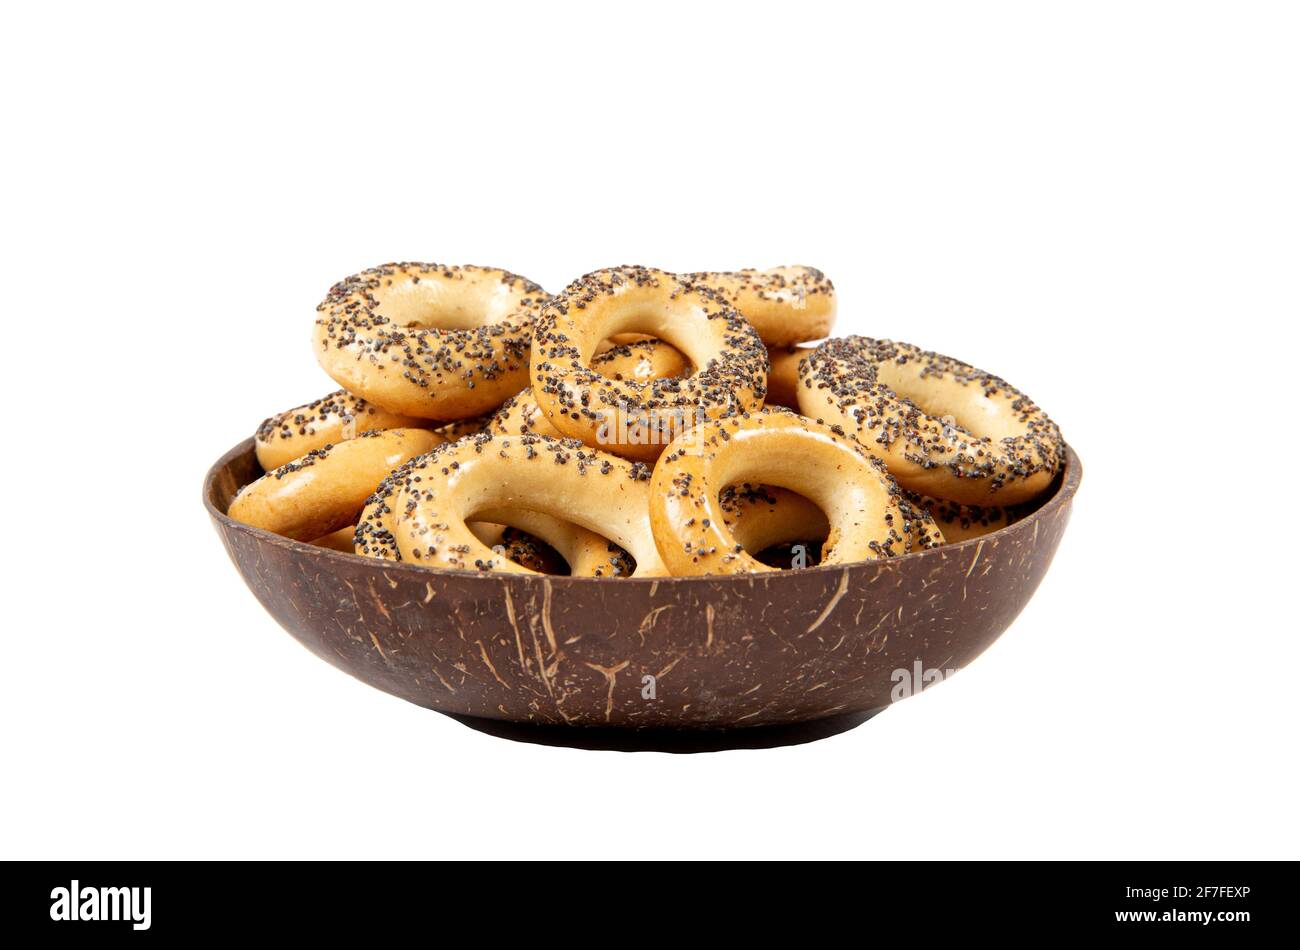 Baranka sushka covered with poppy seeds. Eastern European salty cookie snack in brown natural coconut shell bowl, side view, isolated on white. Stock Photo